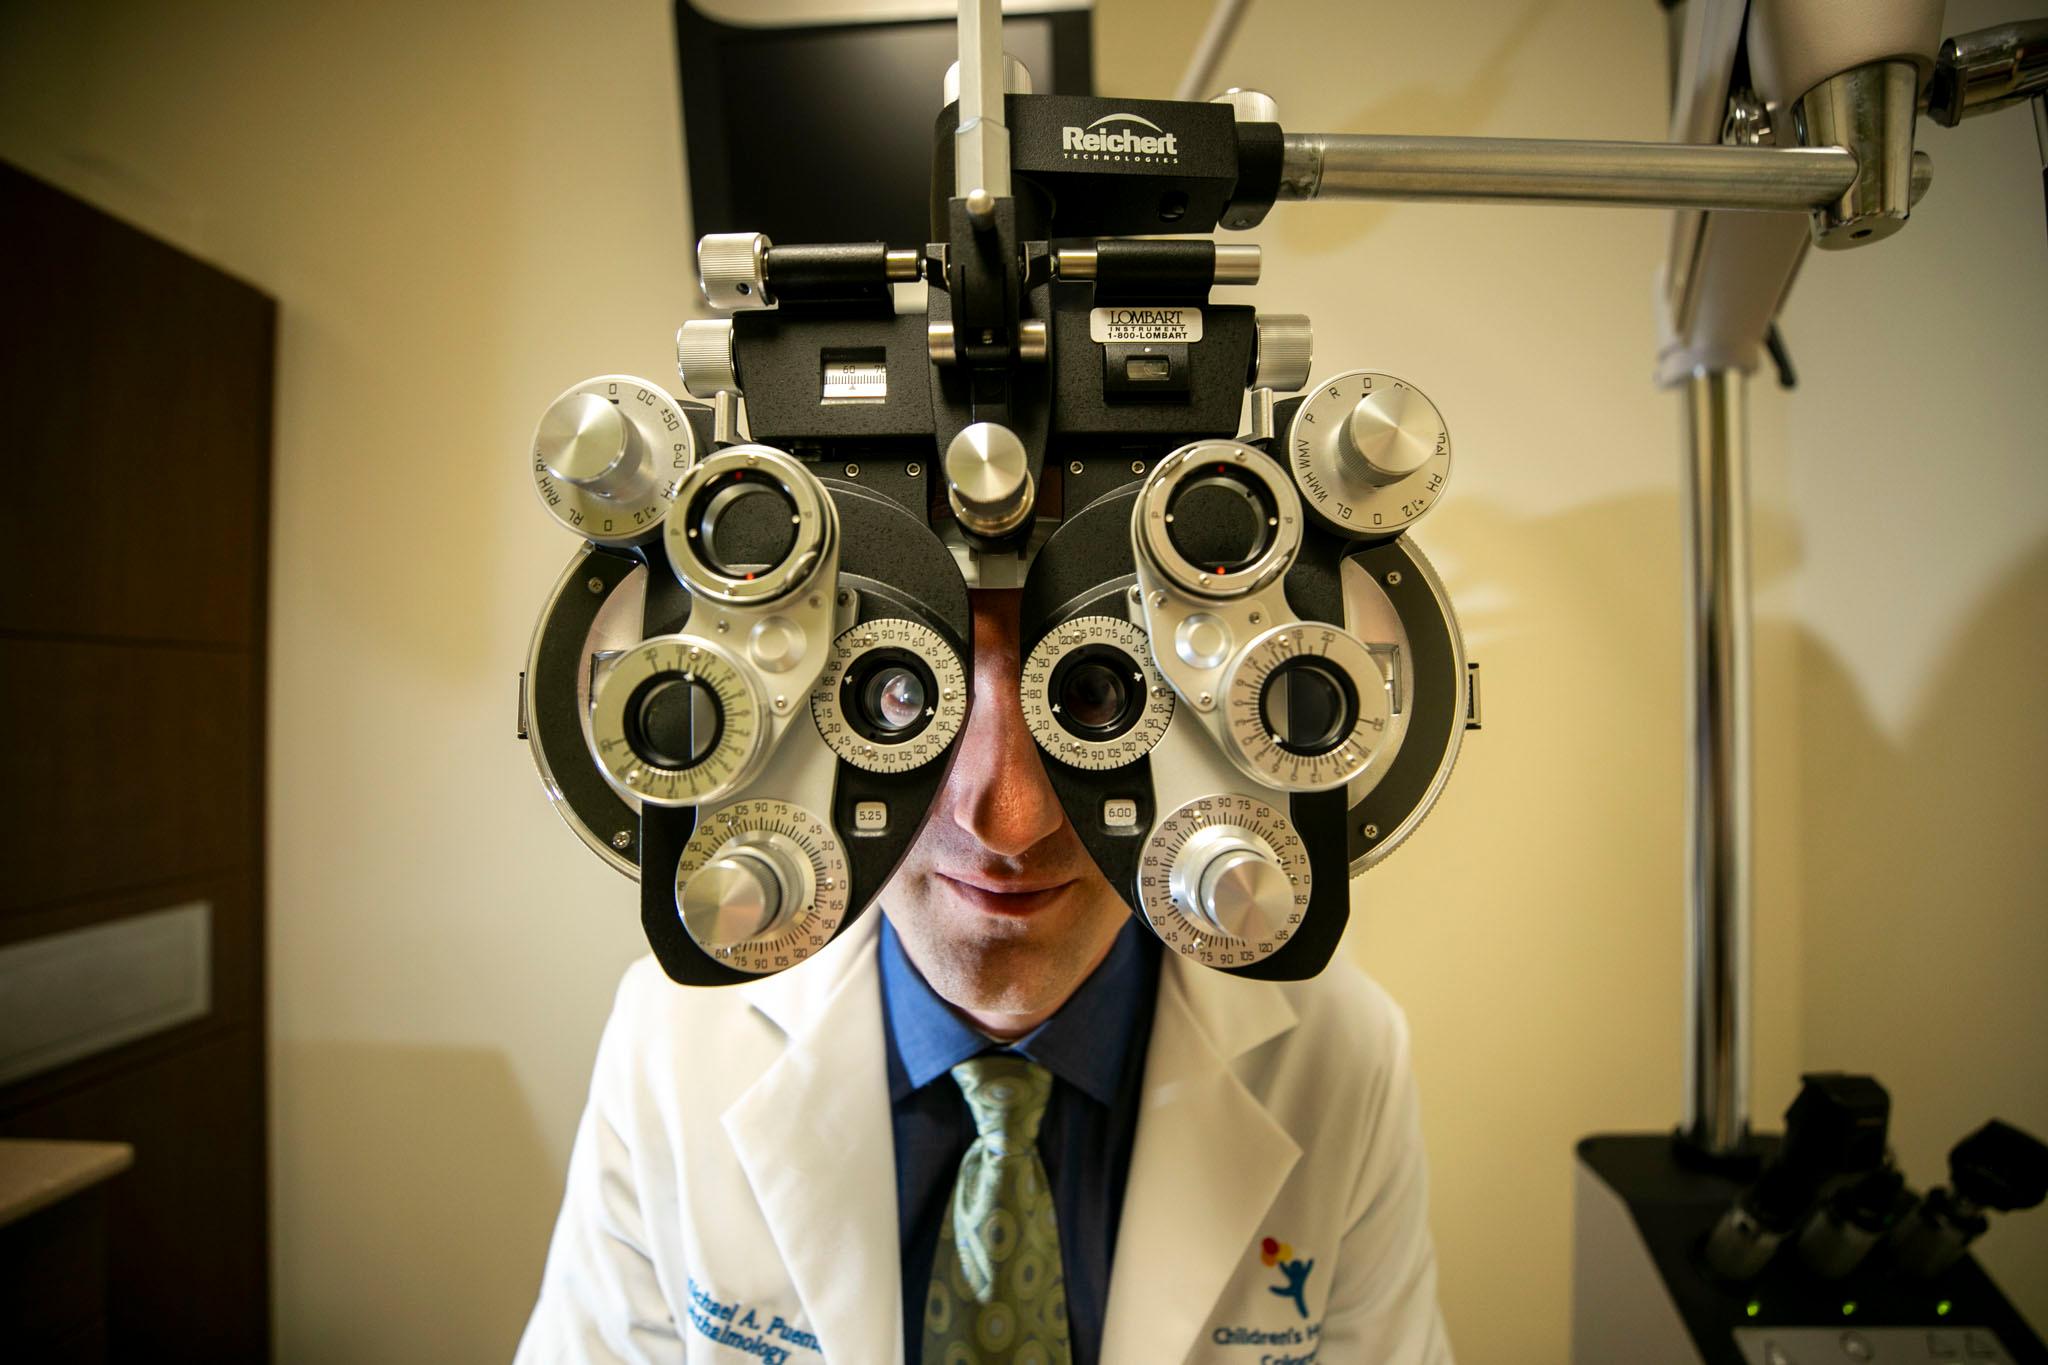 A man wearing a white lab coat and a blue button down shirt peers into a medical device used by eye doctors at the camera.